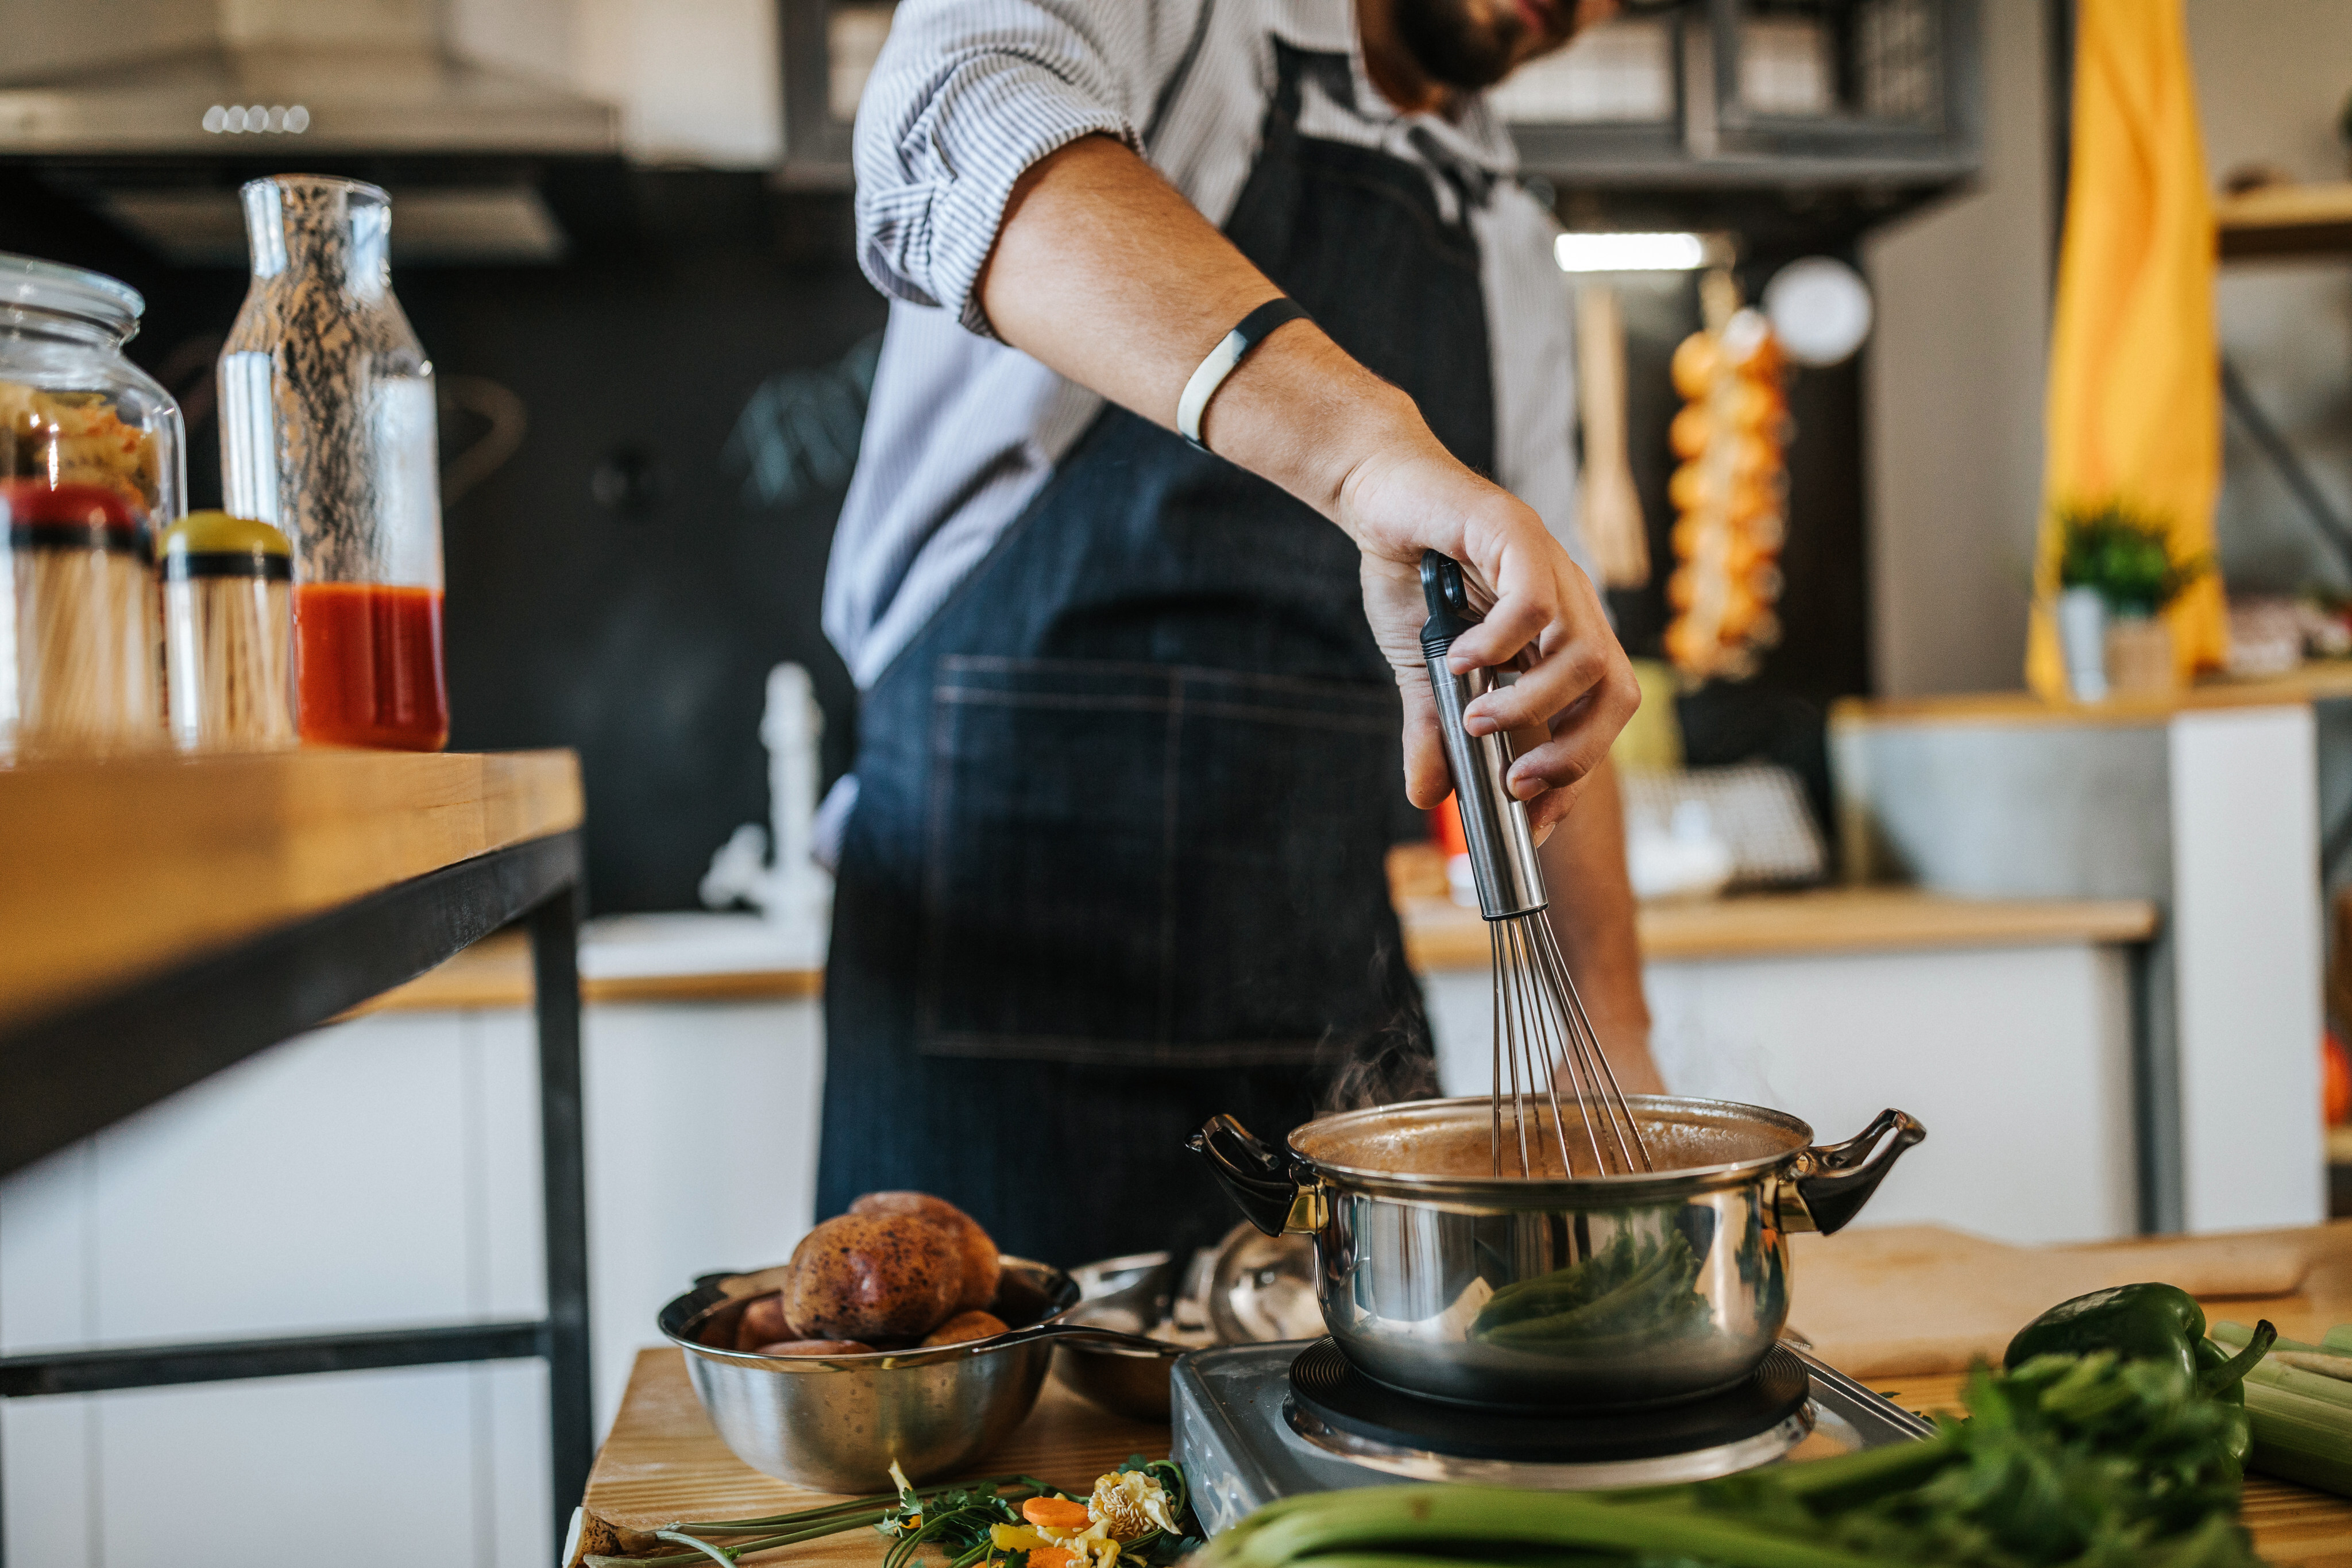 Demand for private and personal chefs has ballooned during the pandemic, offering the convenience and safety of having your food cooked for you in your own home. Photo: Getty Images